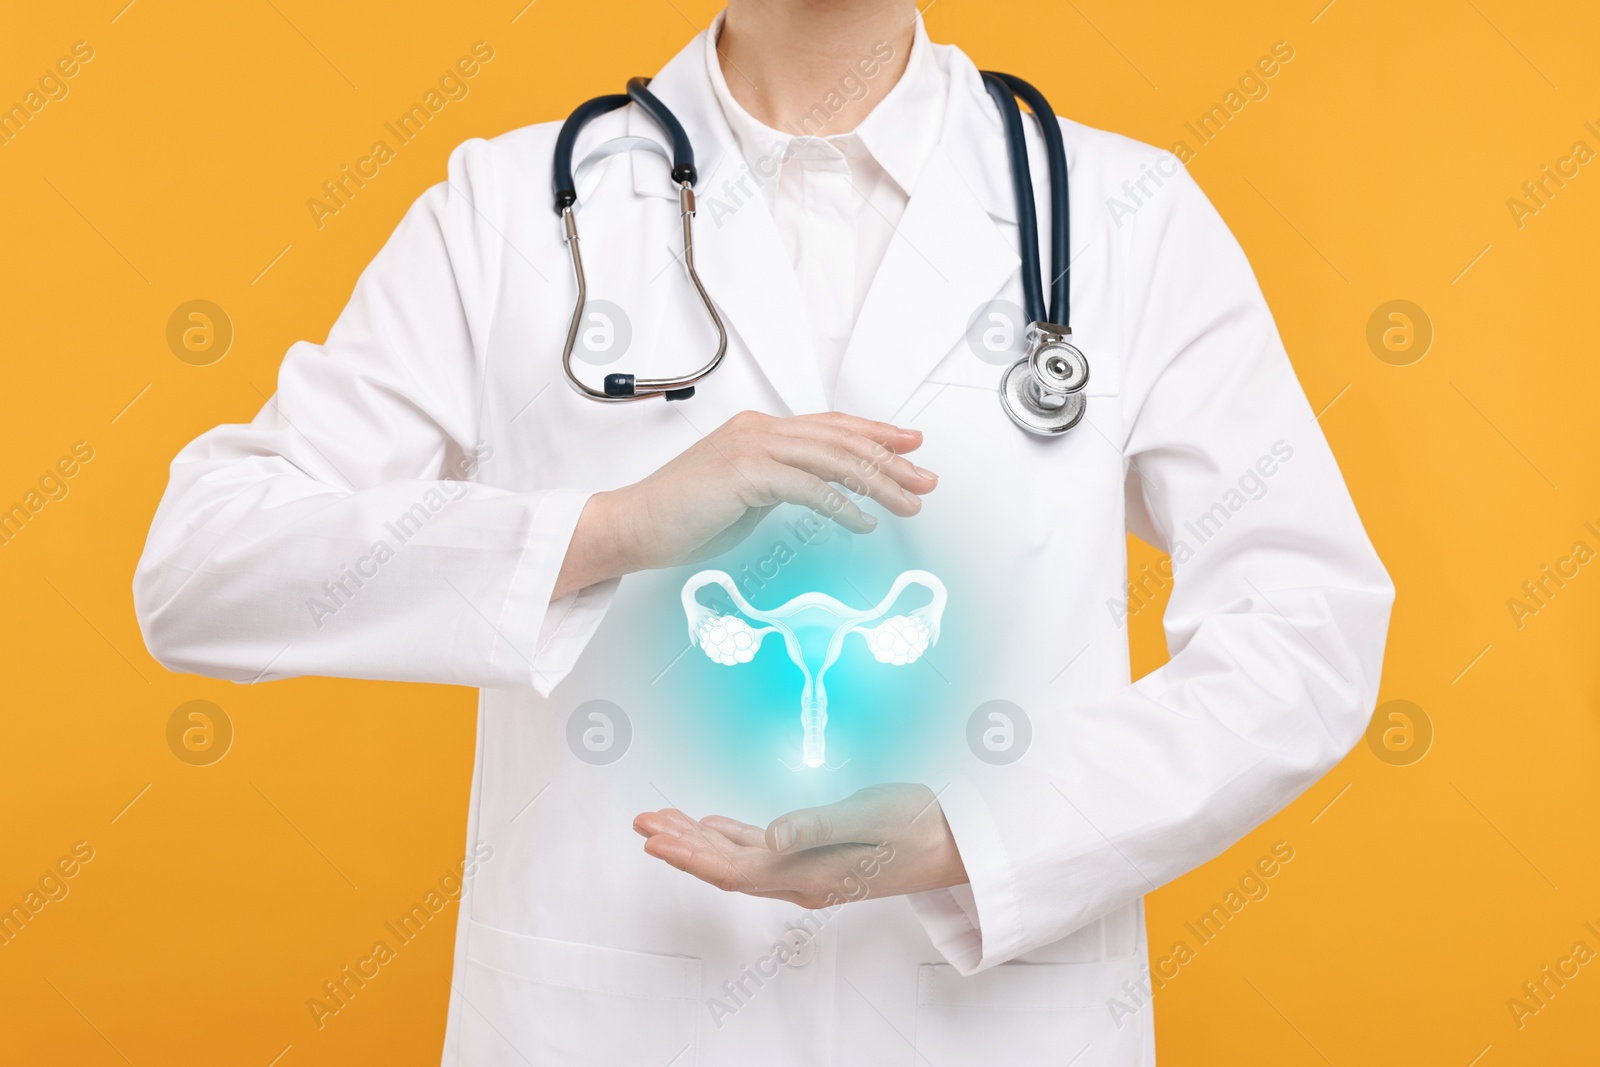 Image of Doctor and illustration of female reproductive system on orange background, closeup